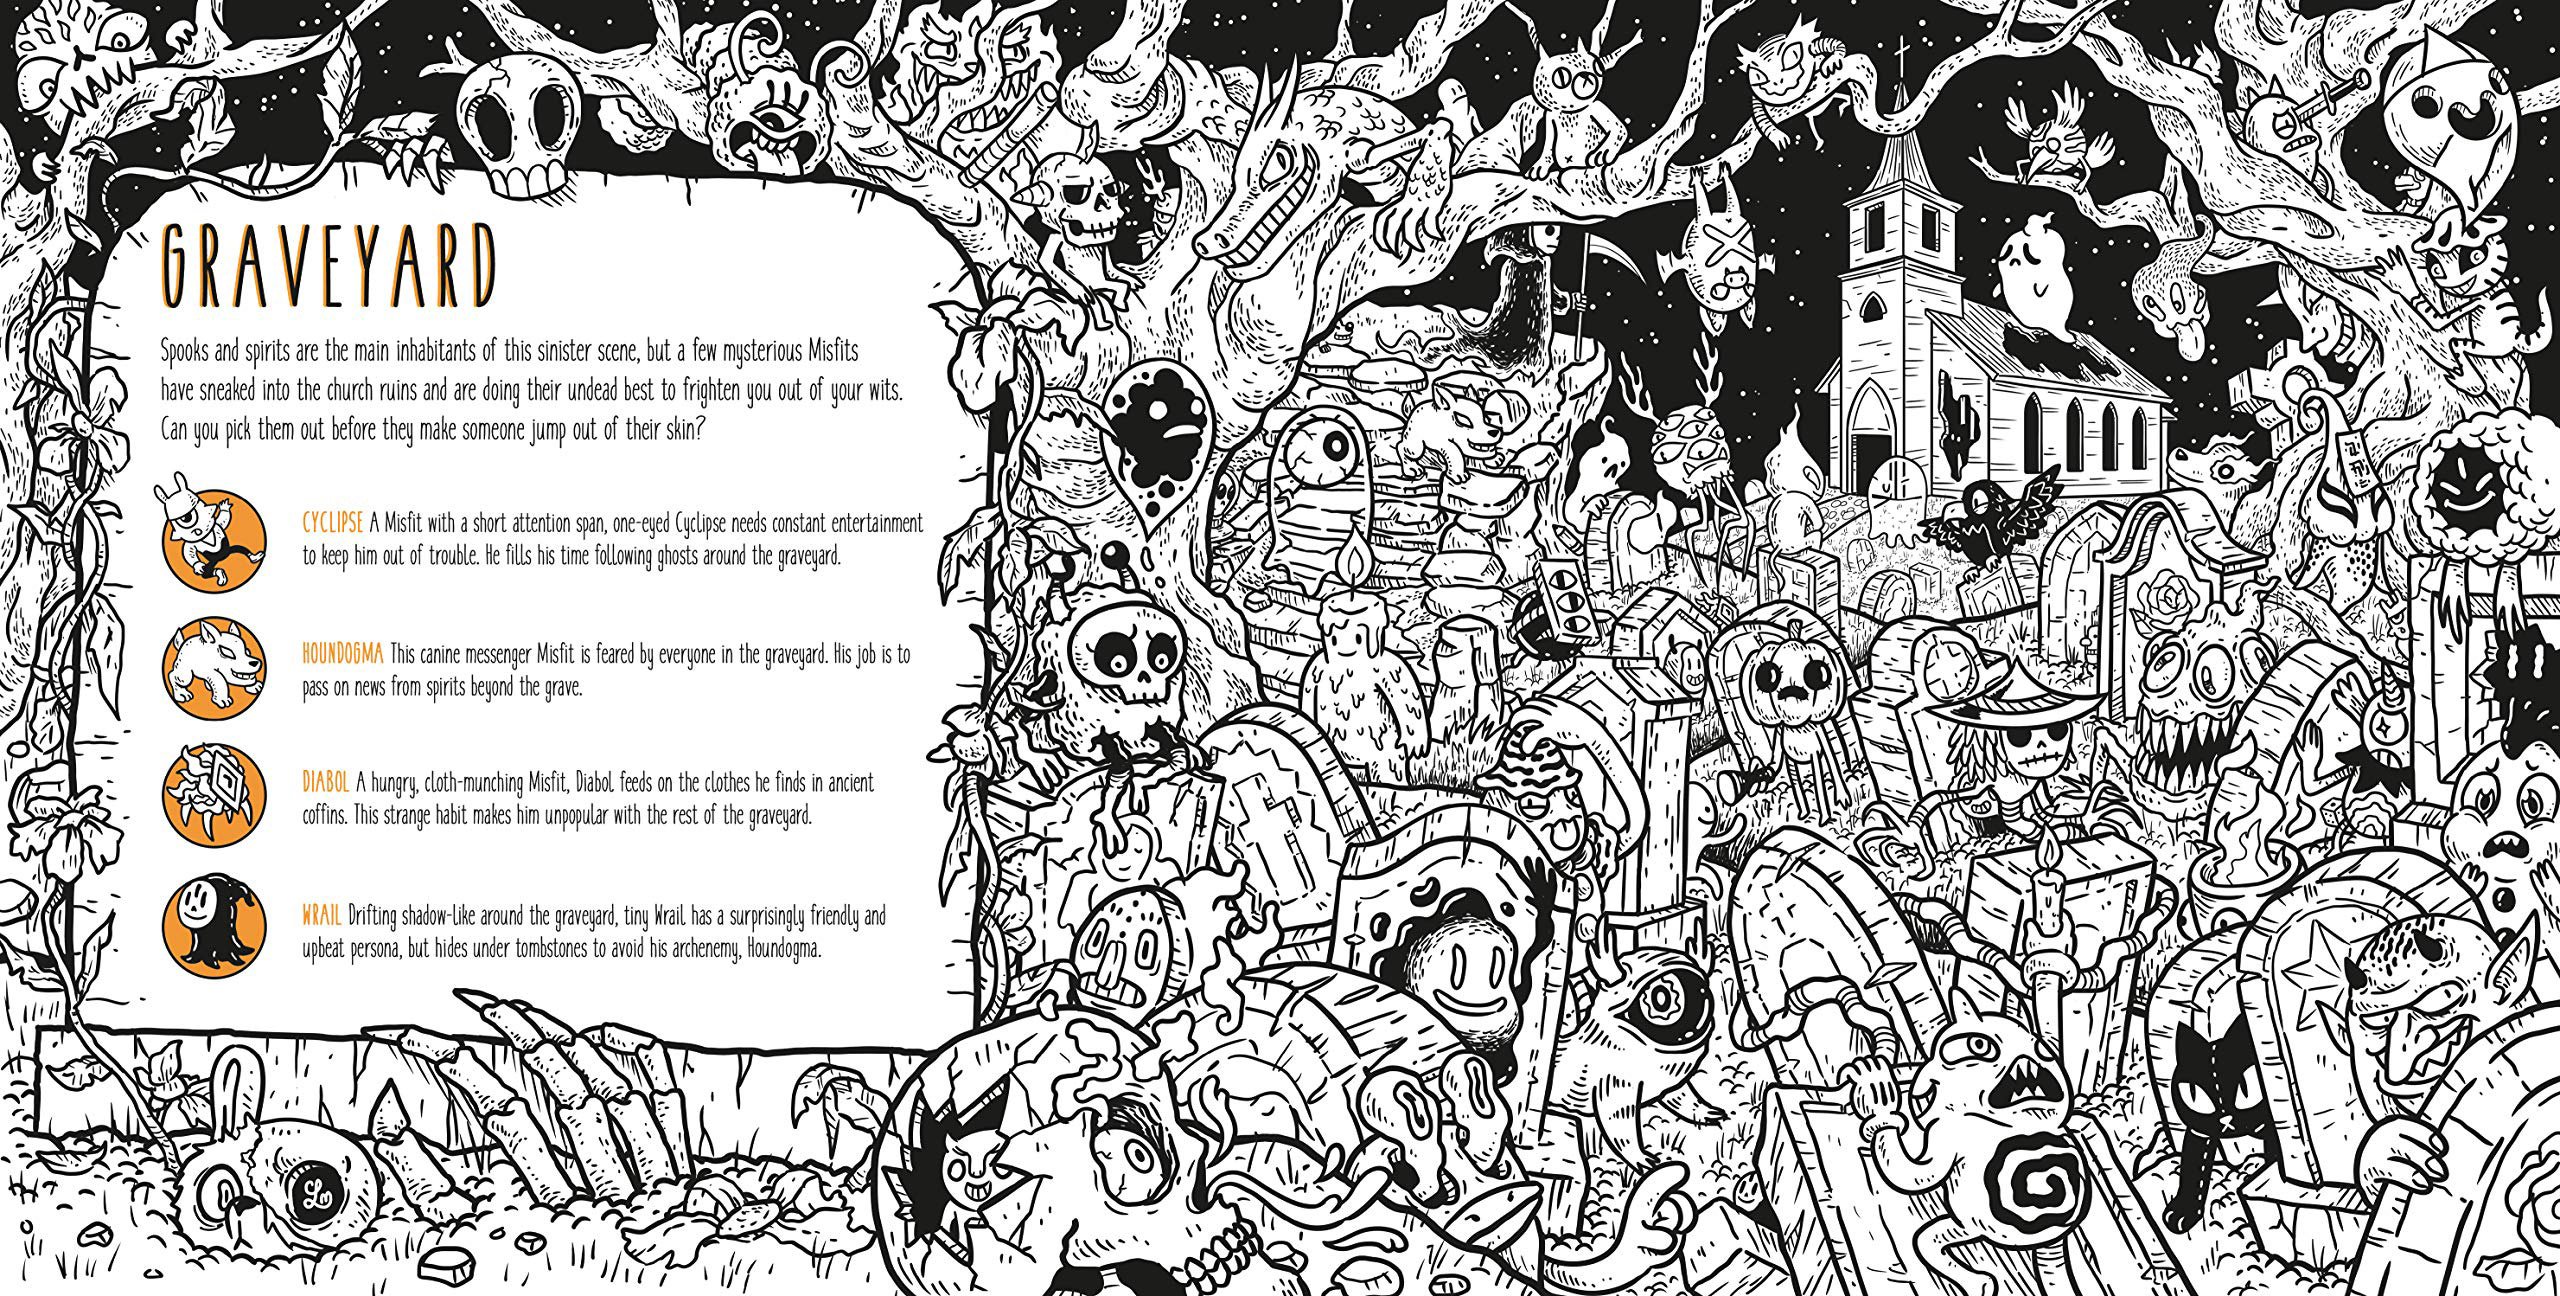 Fright-and-Seek Coloring Book